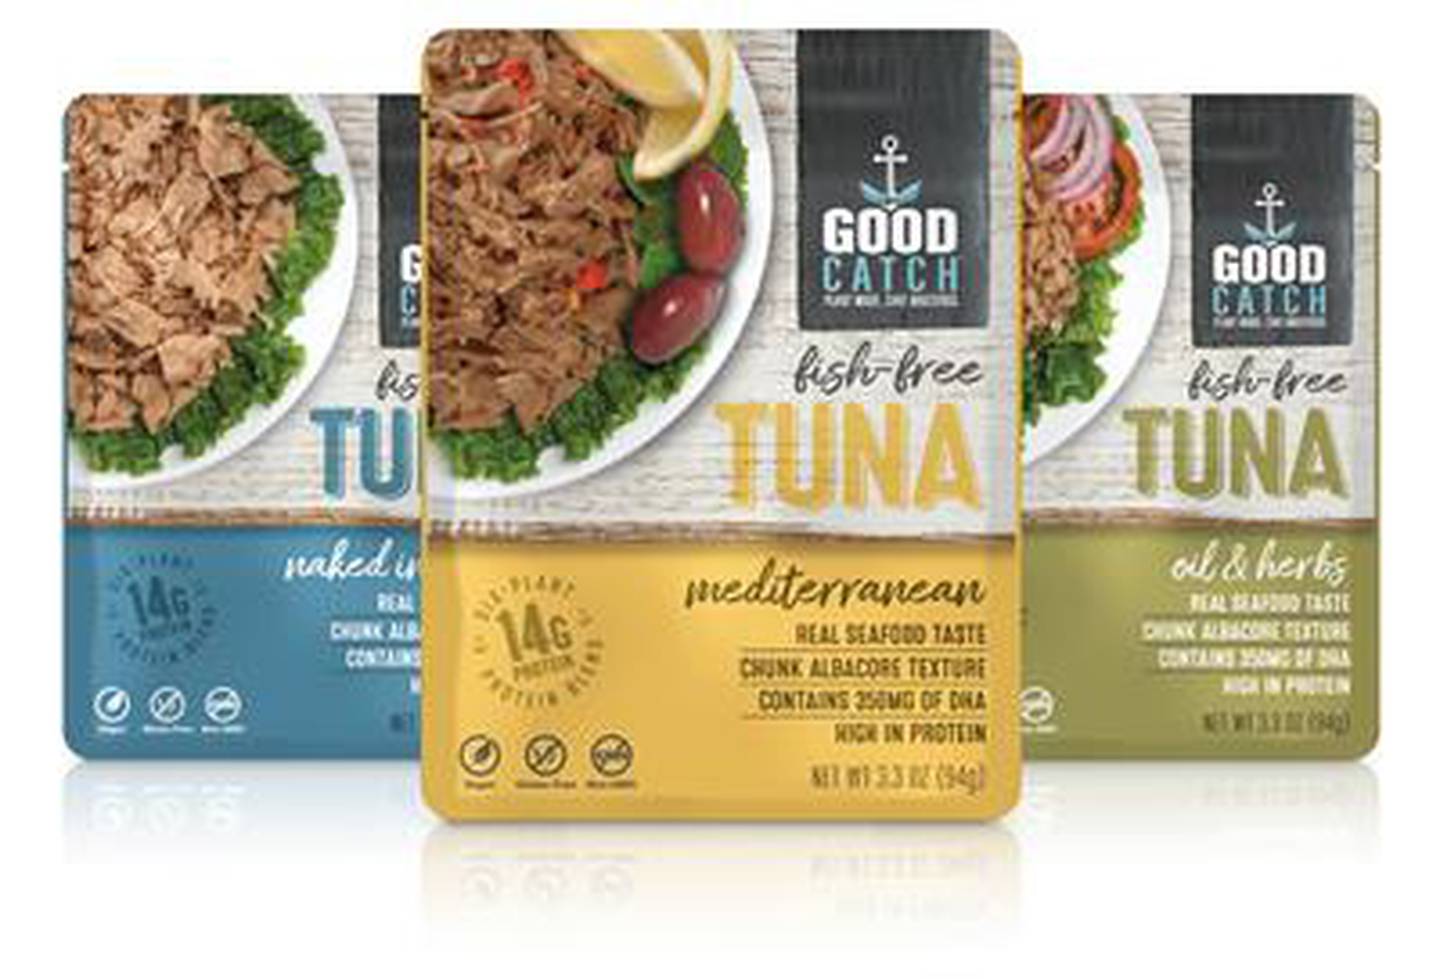 Good Catch Seafoods packaging